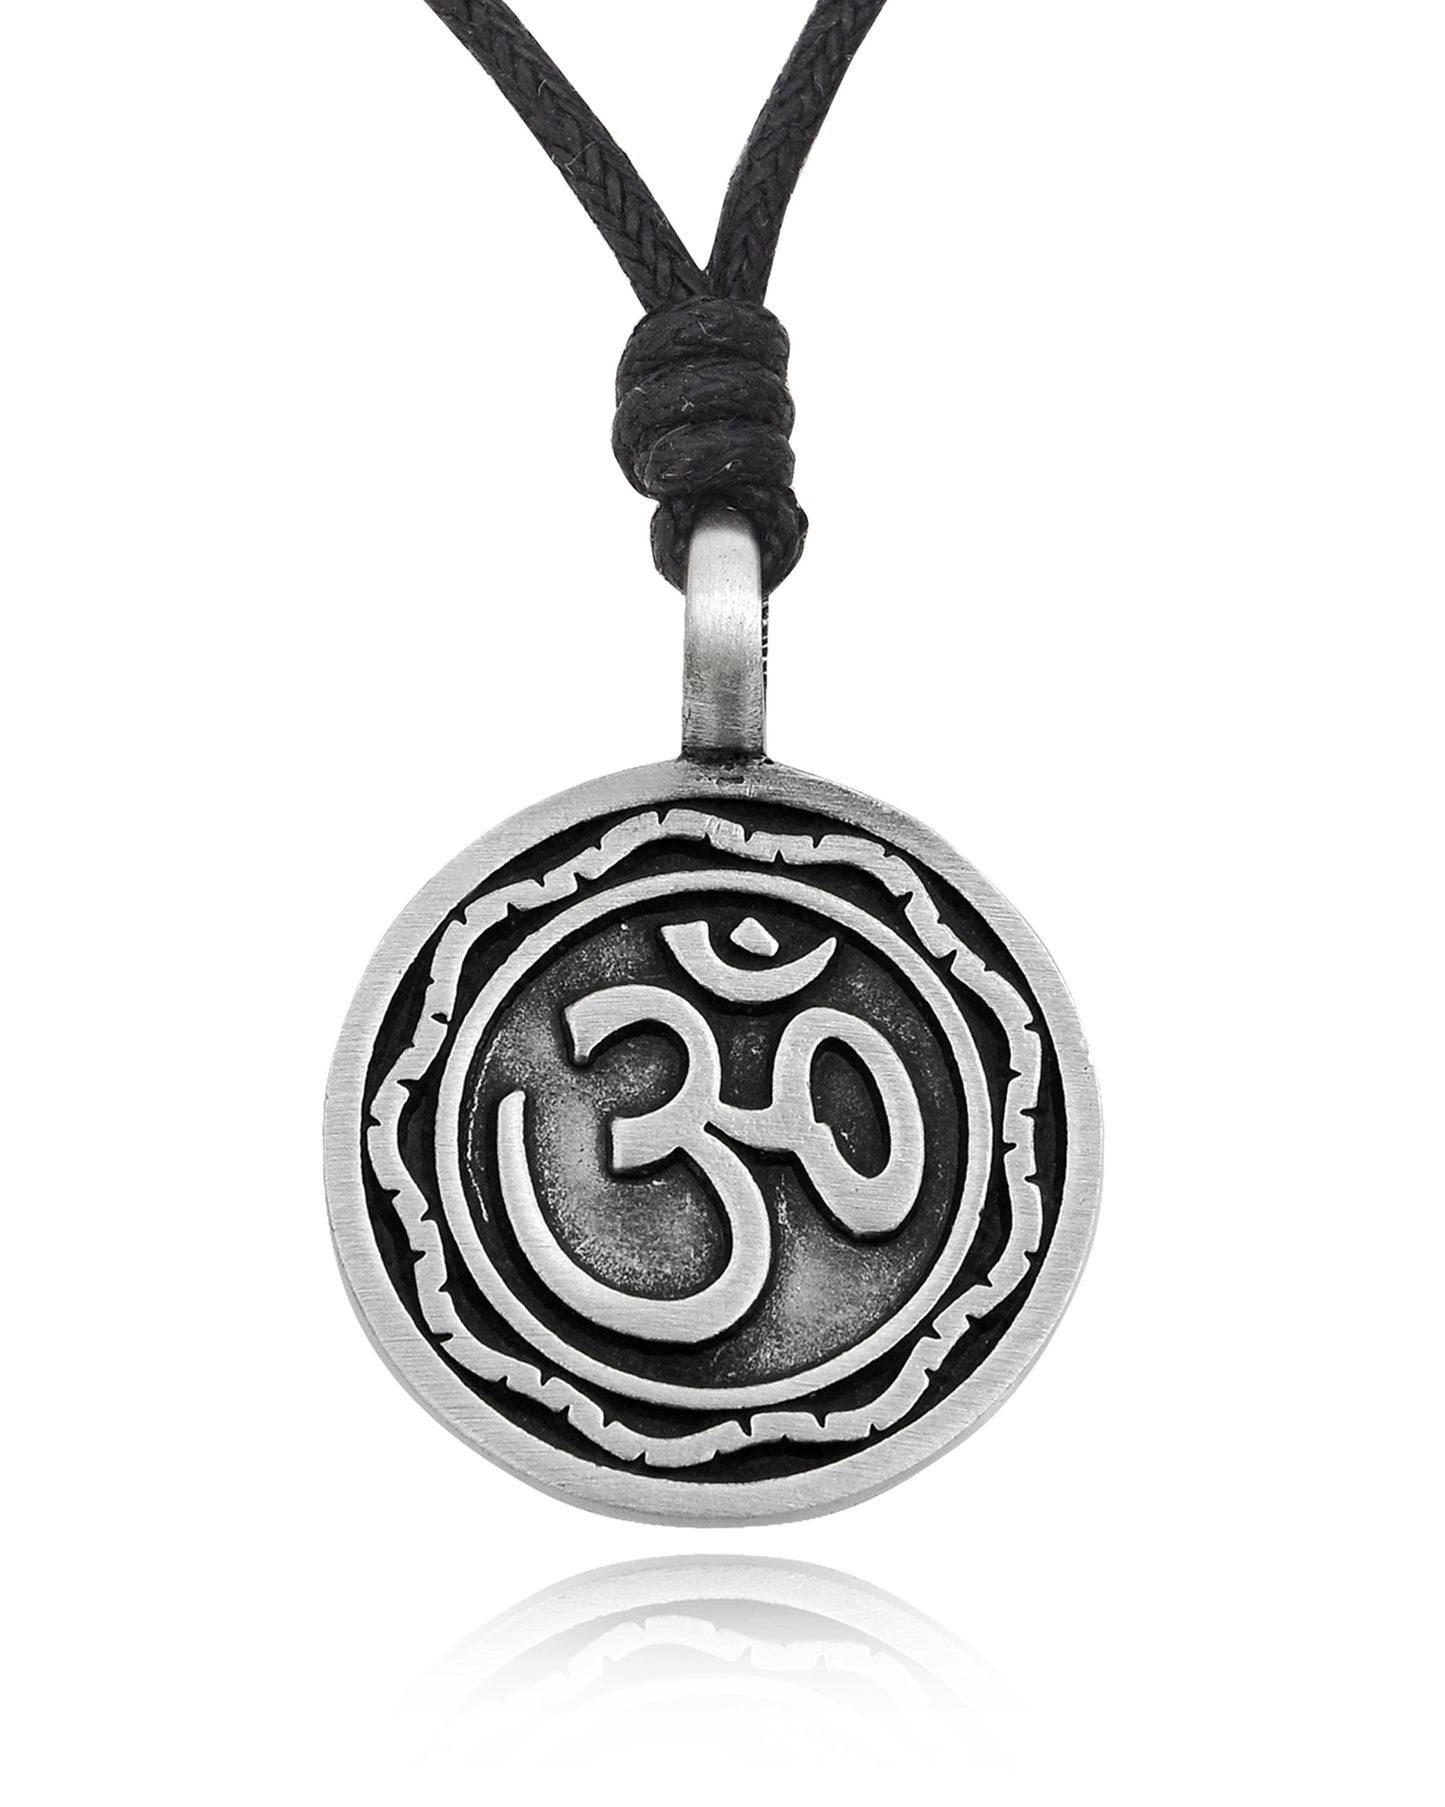 Hindu Word Ohm Silver Pewter Charm Necklace Pendant Jewelry